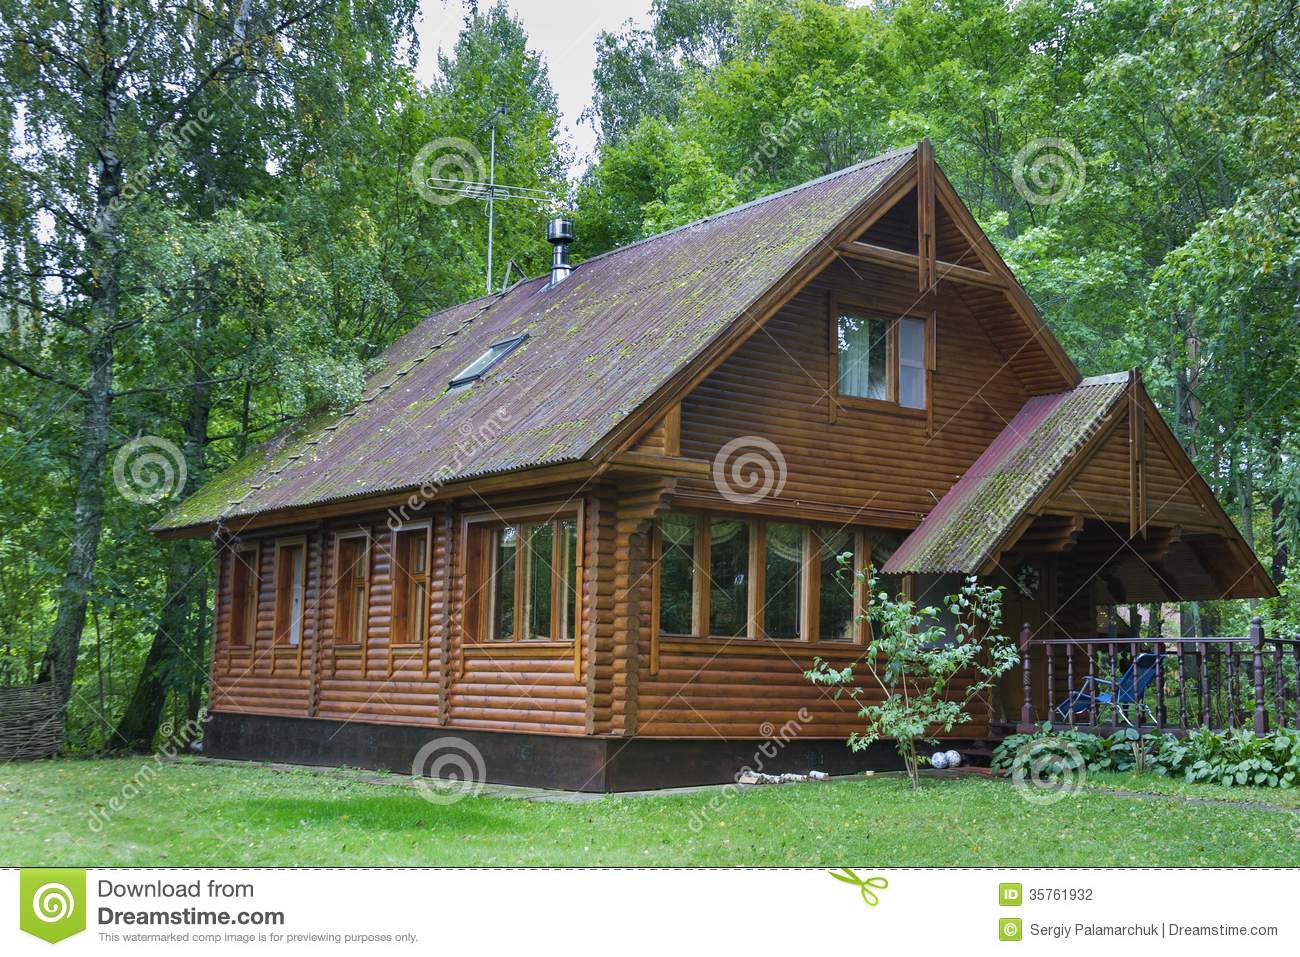 wooden country house photo - 4